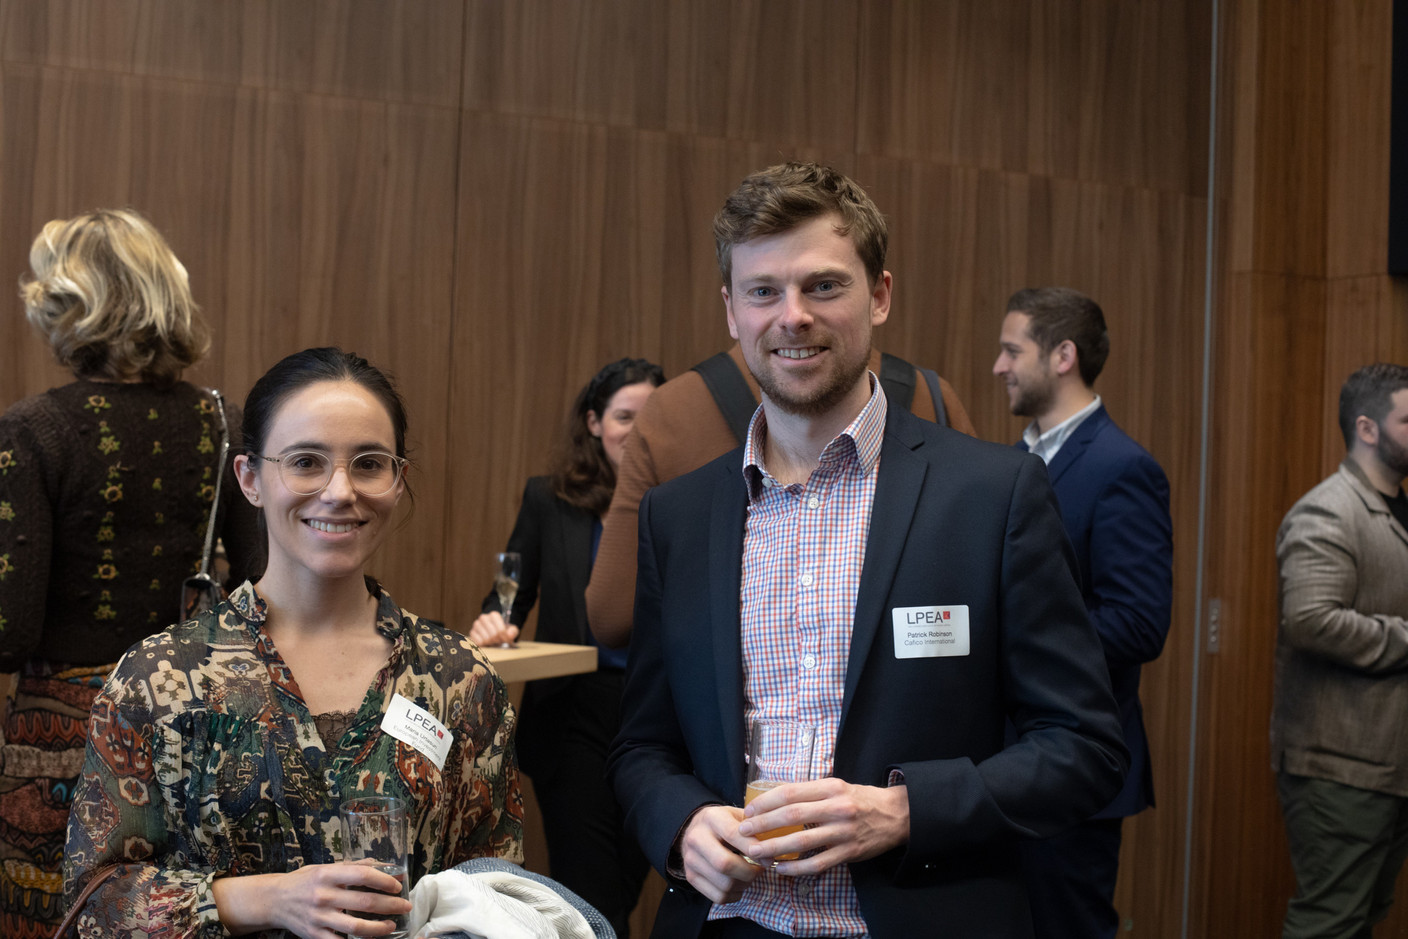 Maria Urtasun (European Investment Fund) and Patrick Robinson (Cafico International) at the LPEA's transfer pricing event on 3 May 2023. Photo: Matic Zorman / Maison Moderne